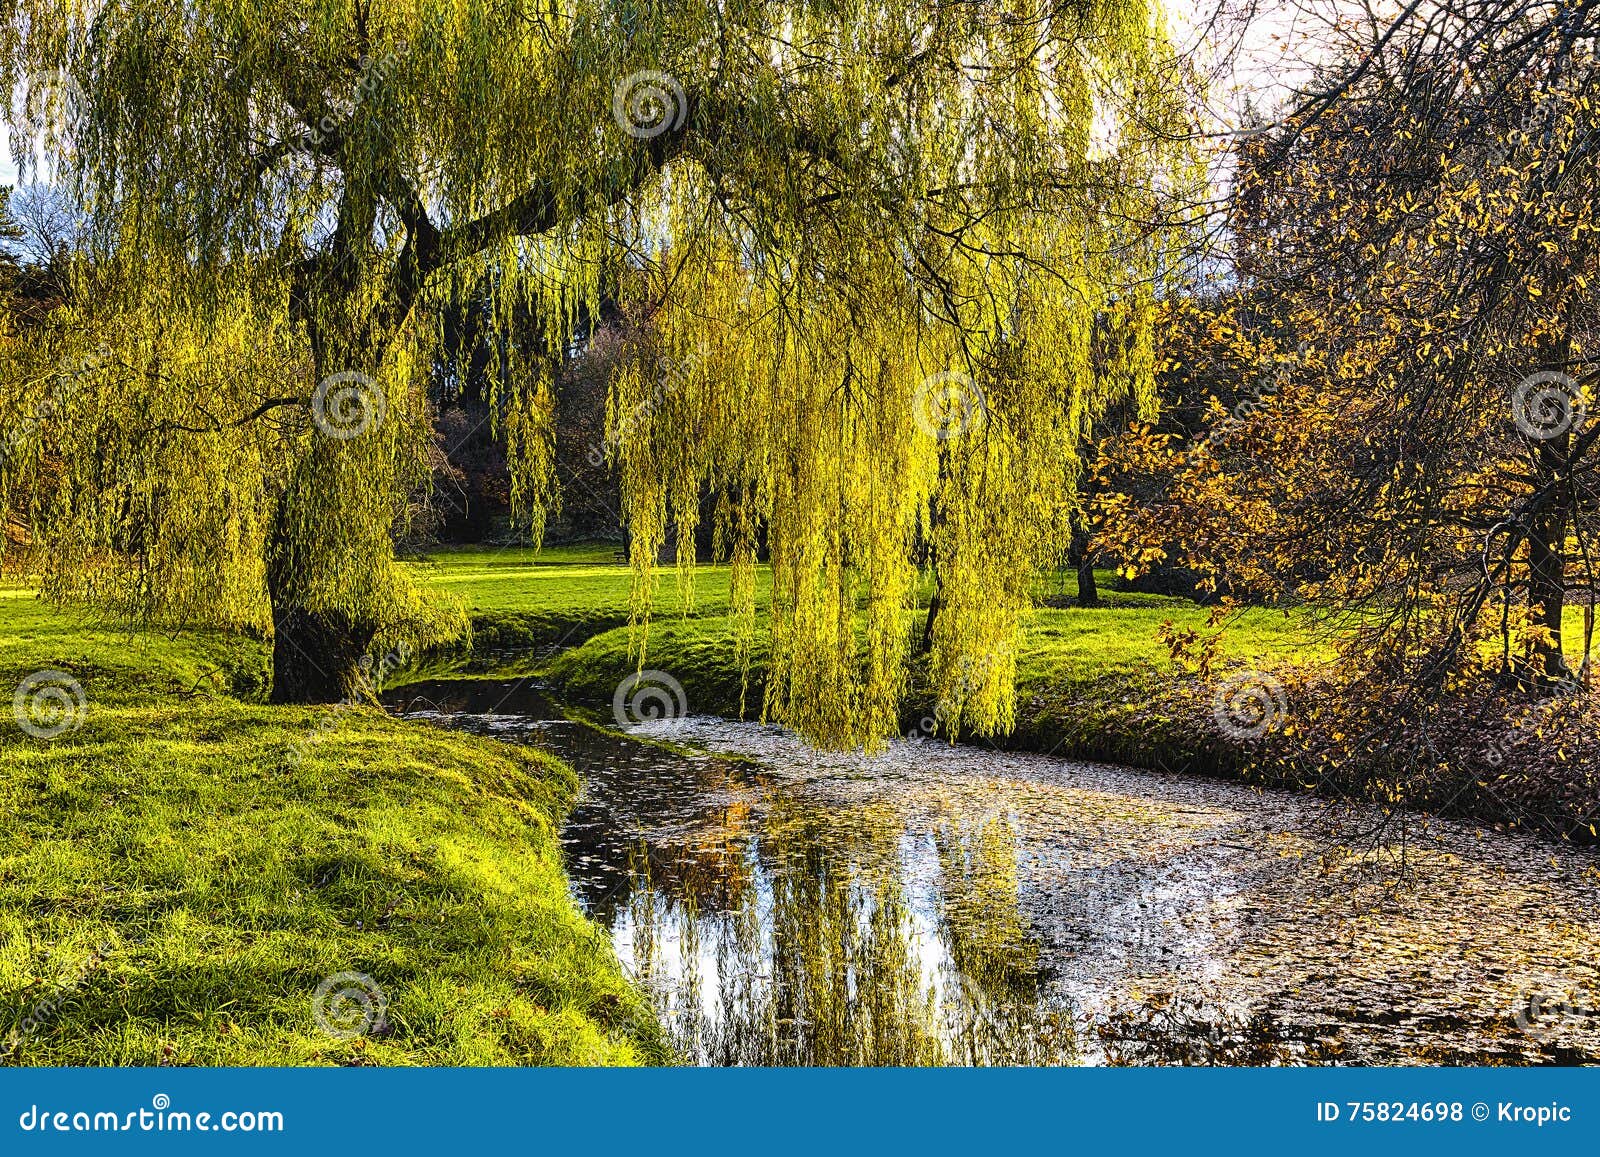 willow tree by the pond